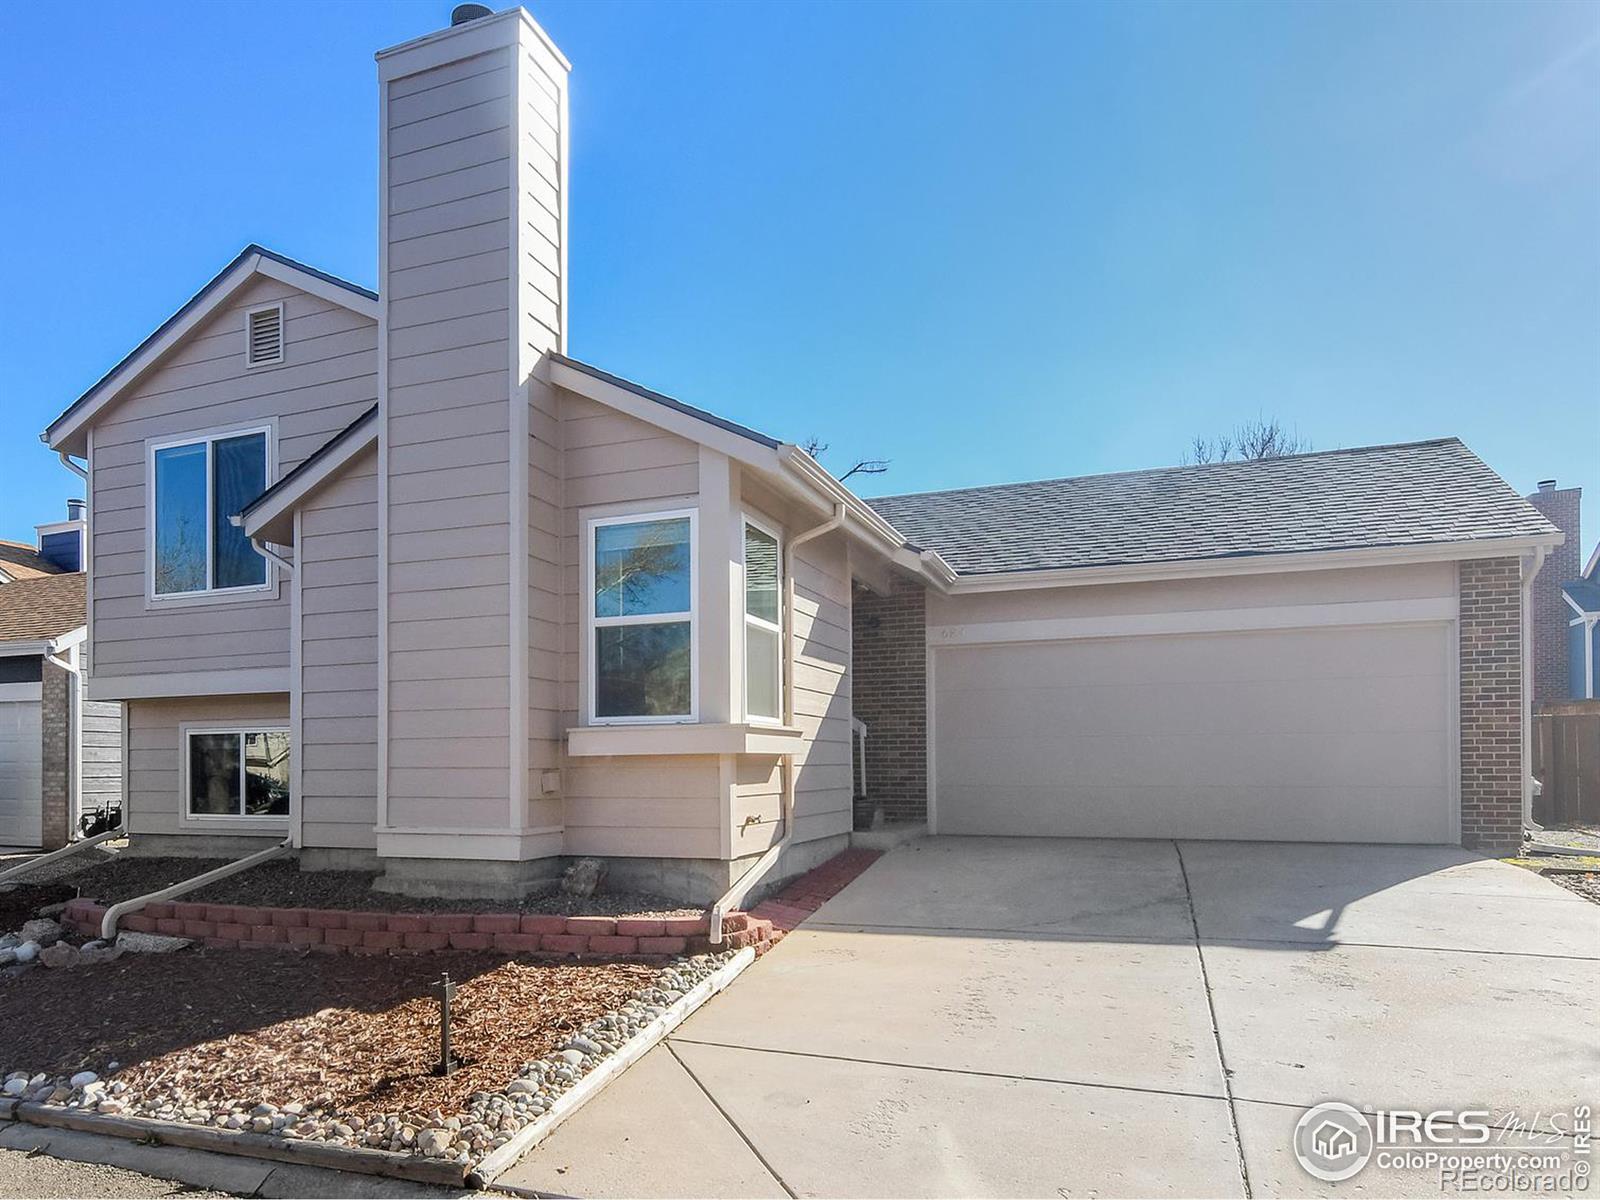 684  Delwood Court, highlands ranch MLS: 4567891006500 Beds: 3 Baths: 2 Price: $535,000